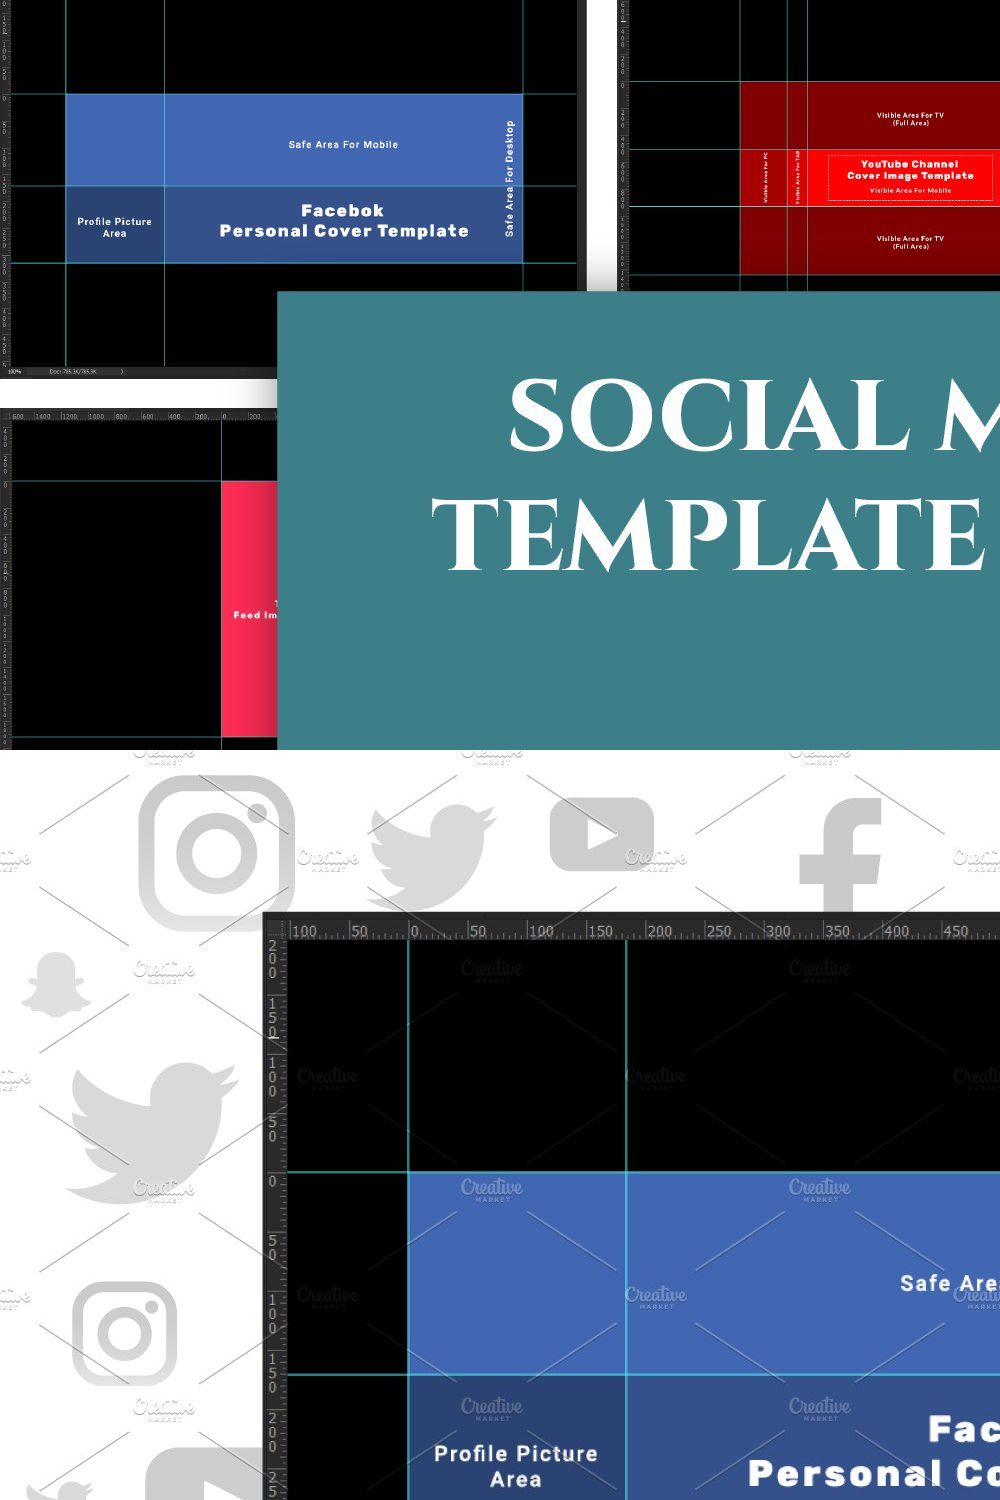 Social Media Template Guide pinterest preview image.